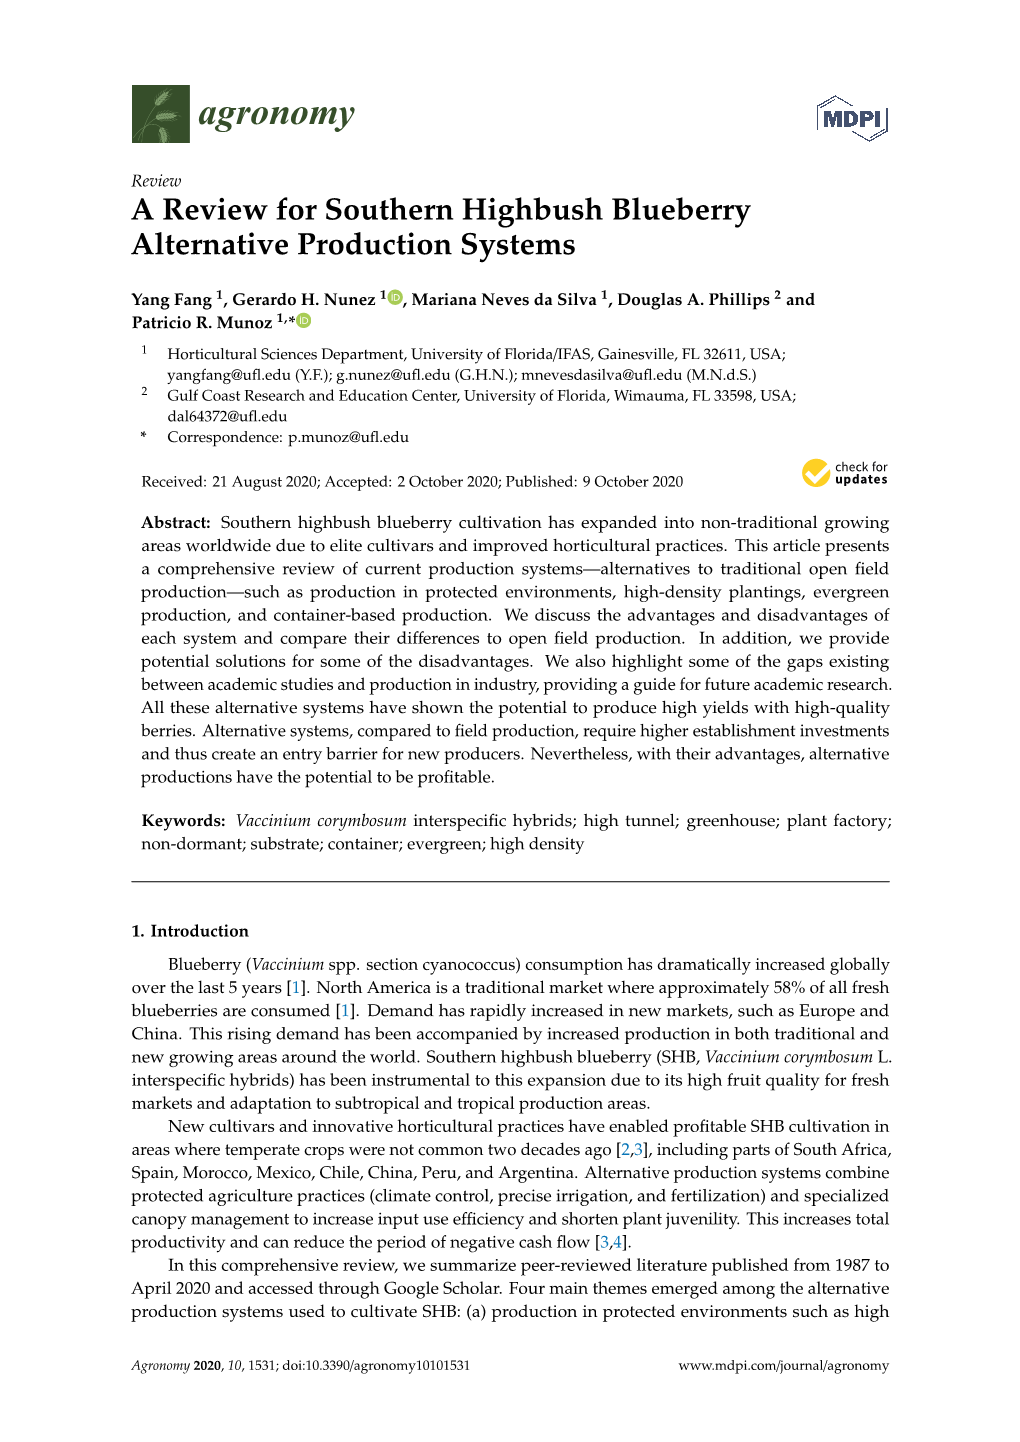 A Review for Southern Highbush Blueberry Alternative Production Systems